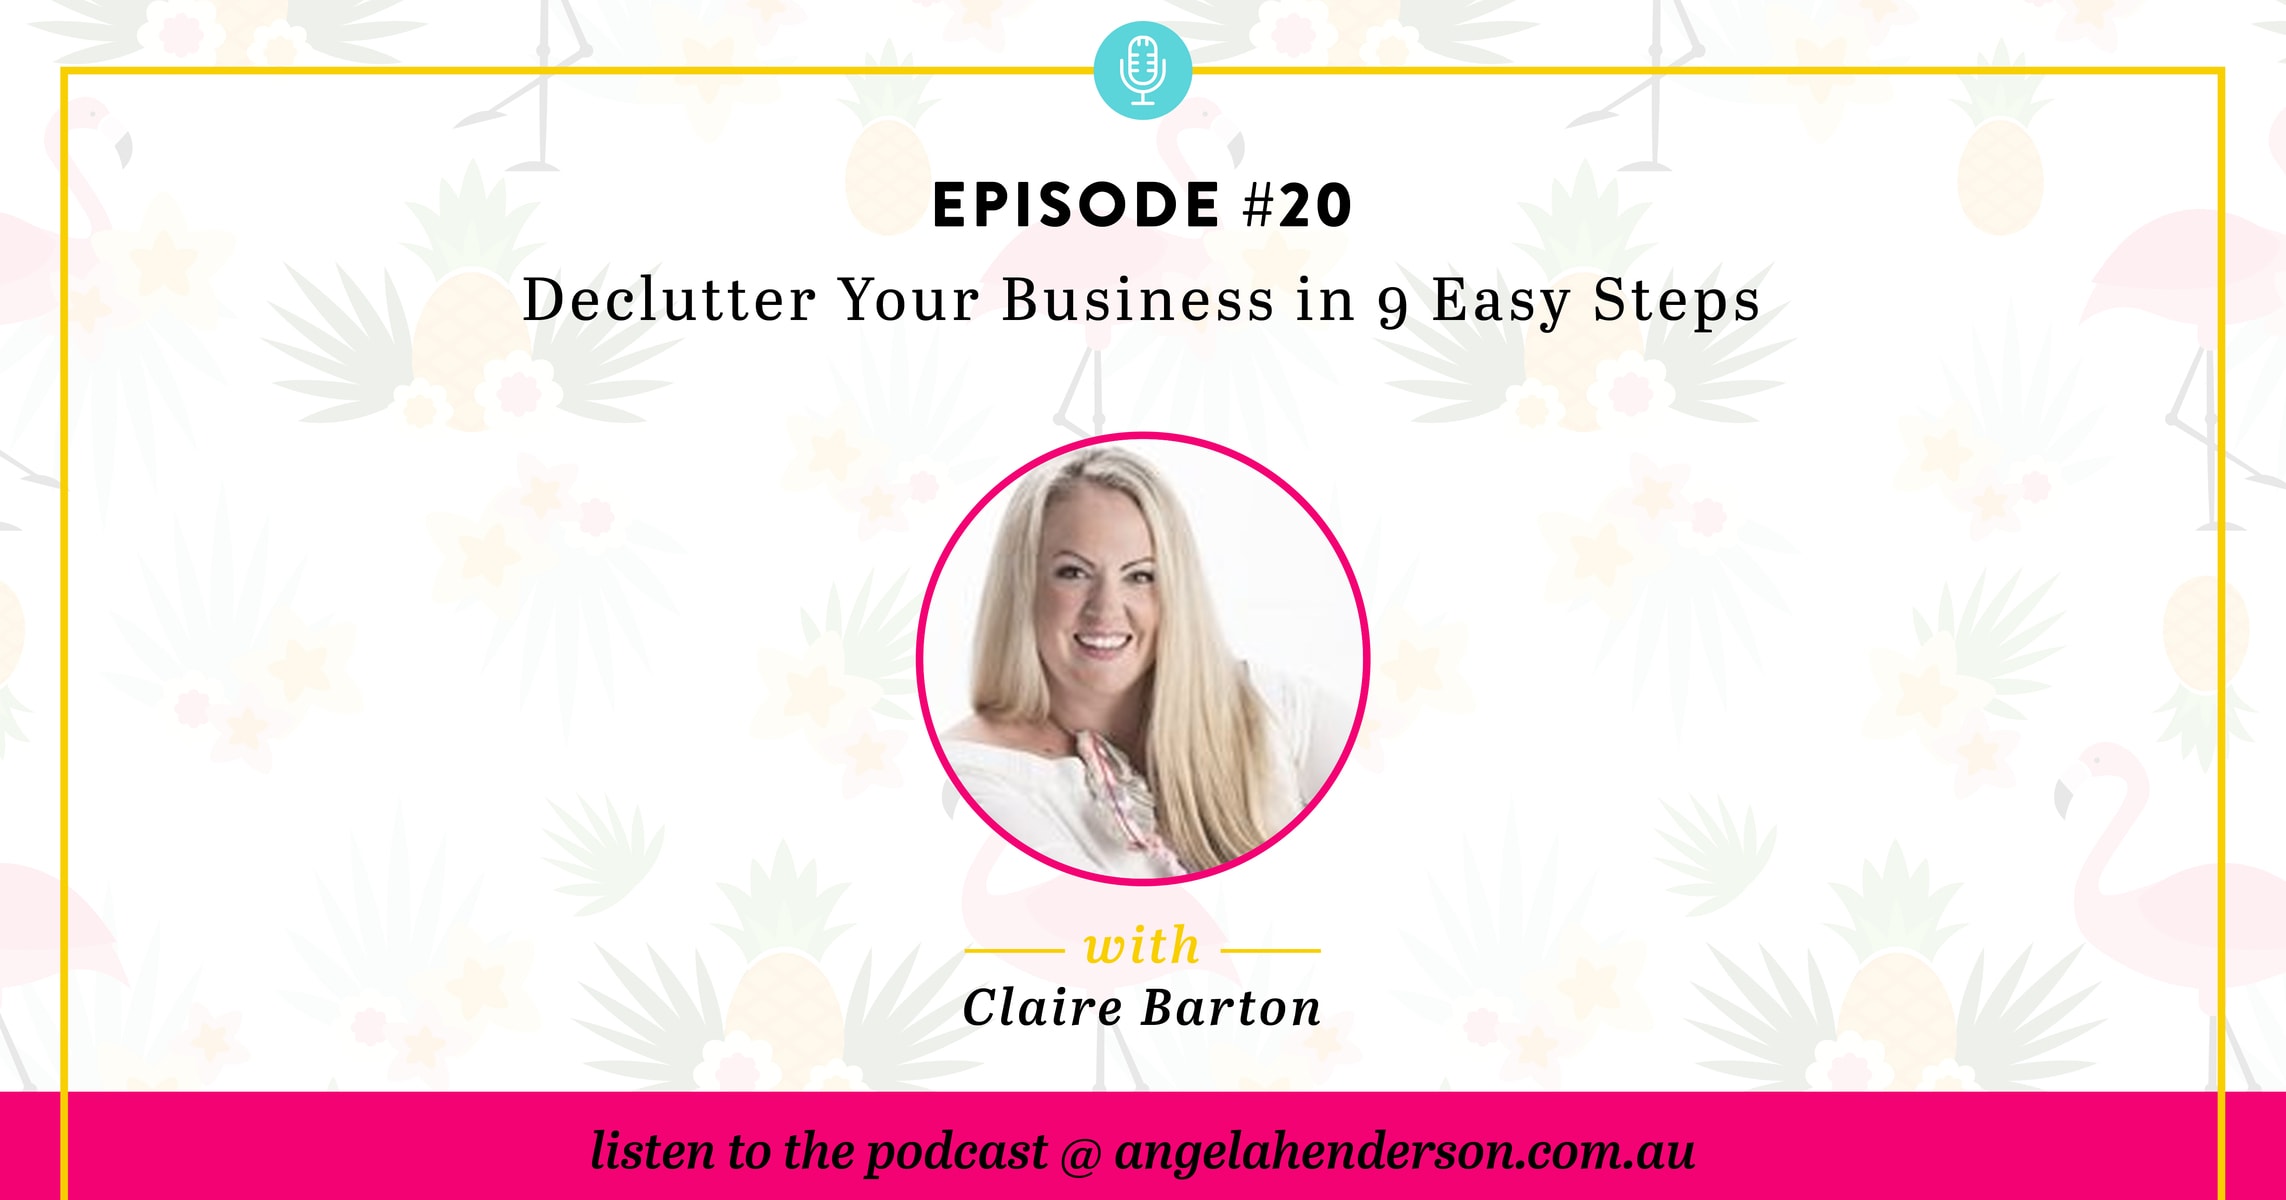 Declutter Your Business in 9 Easy Steps